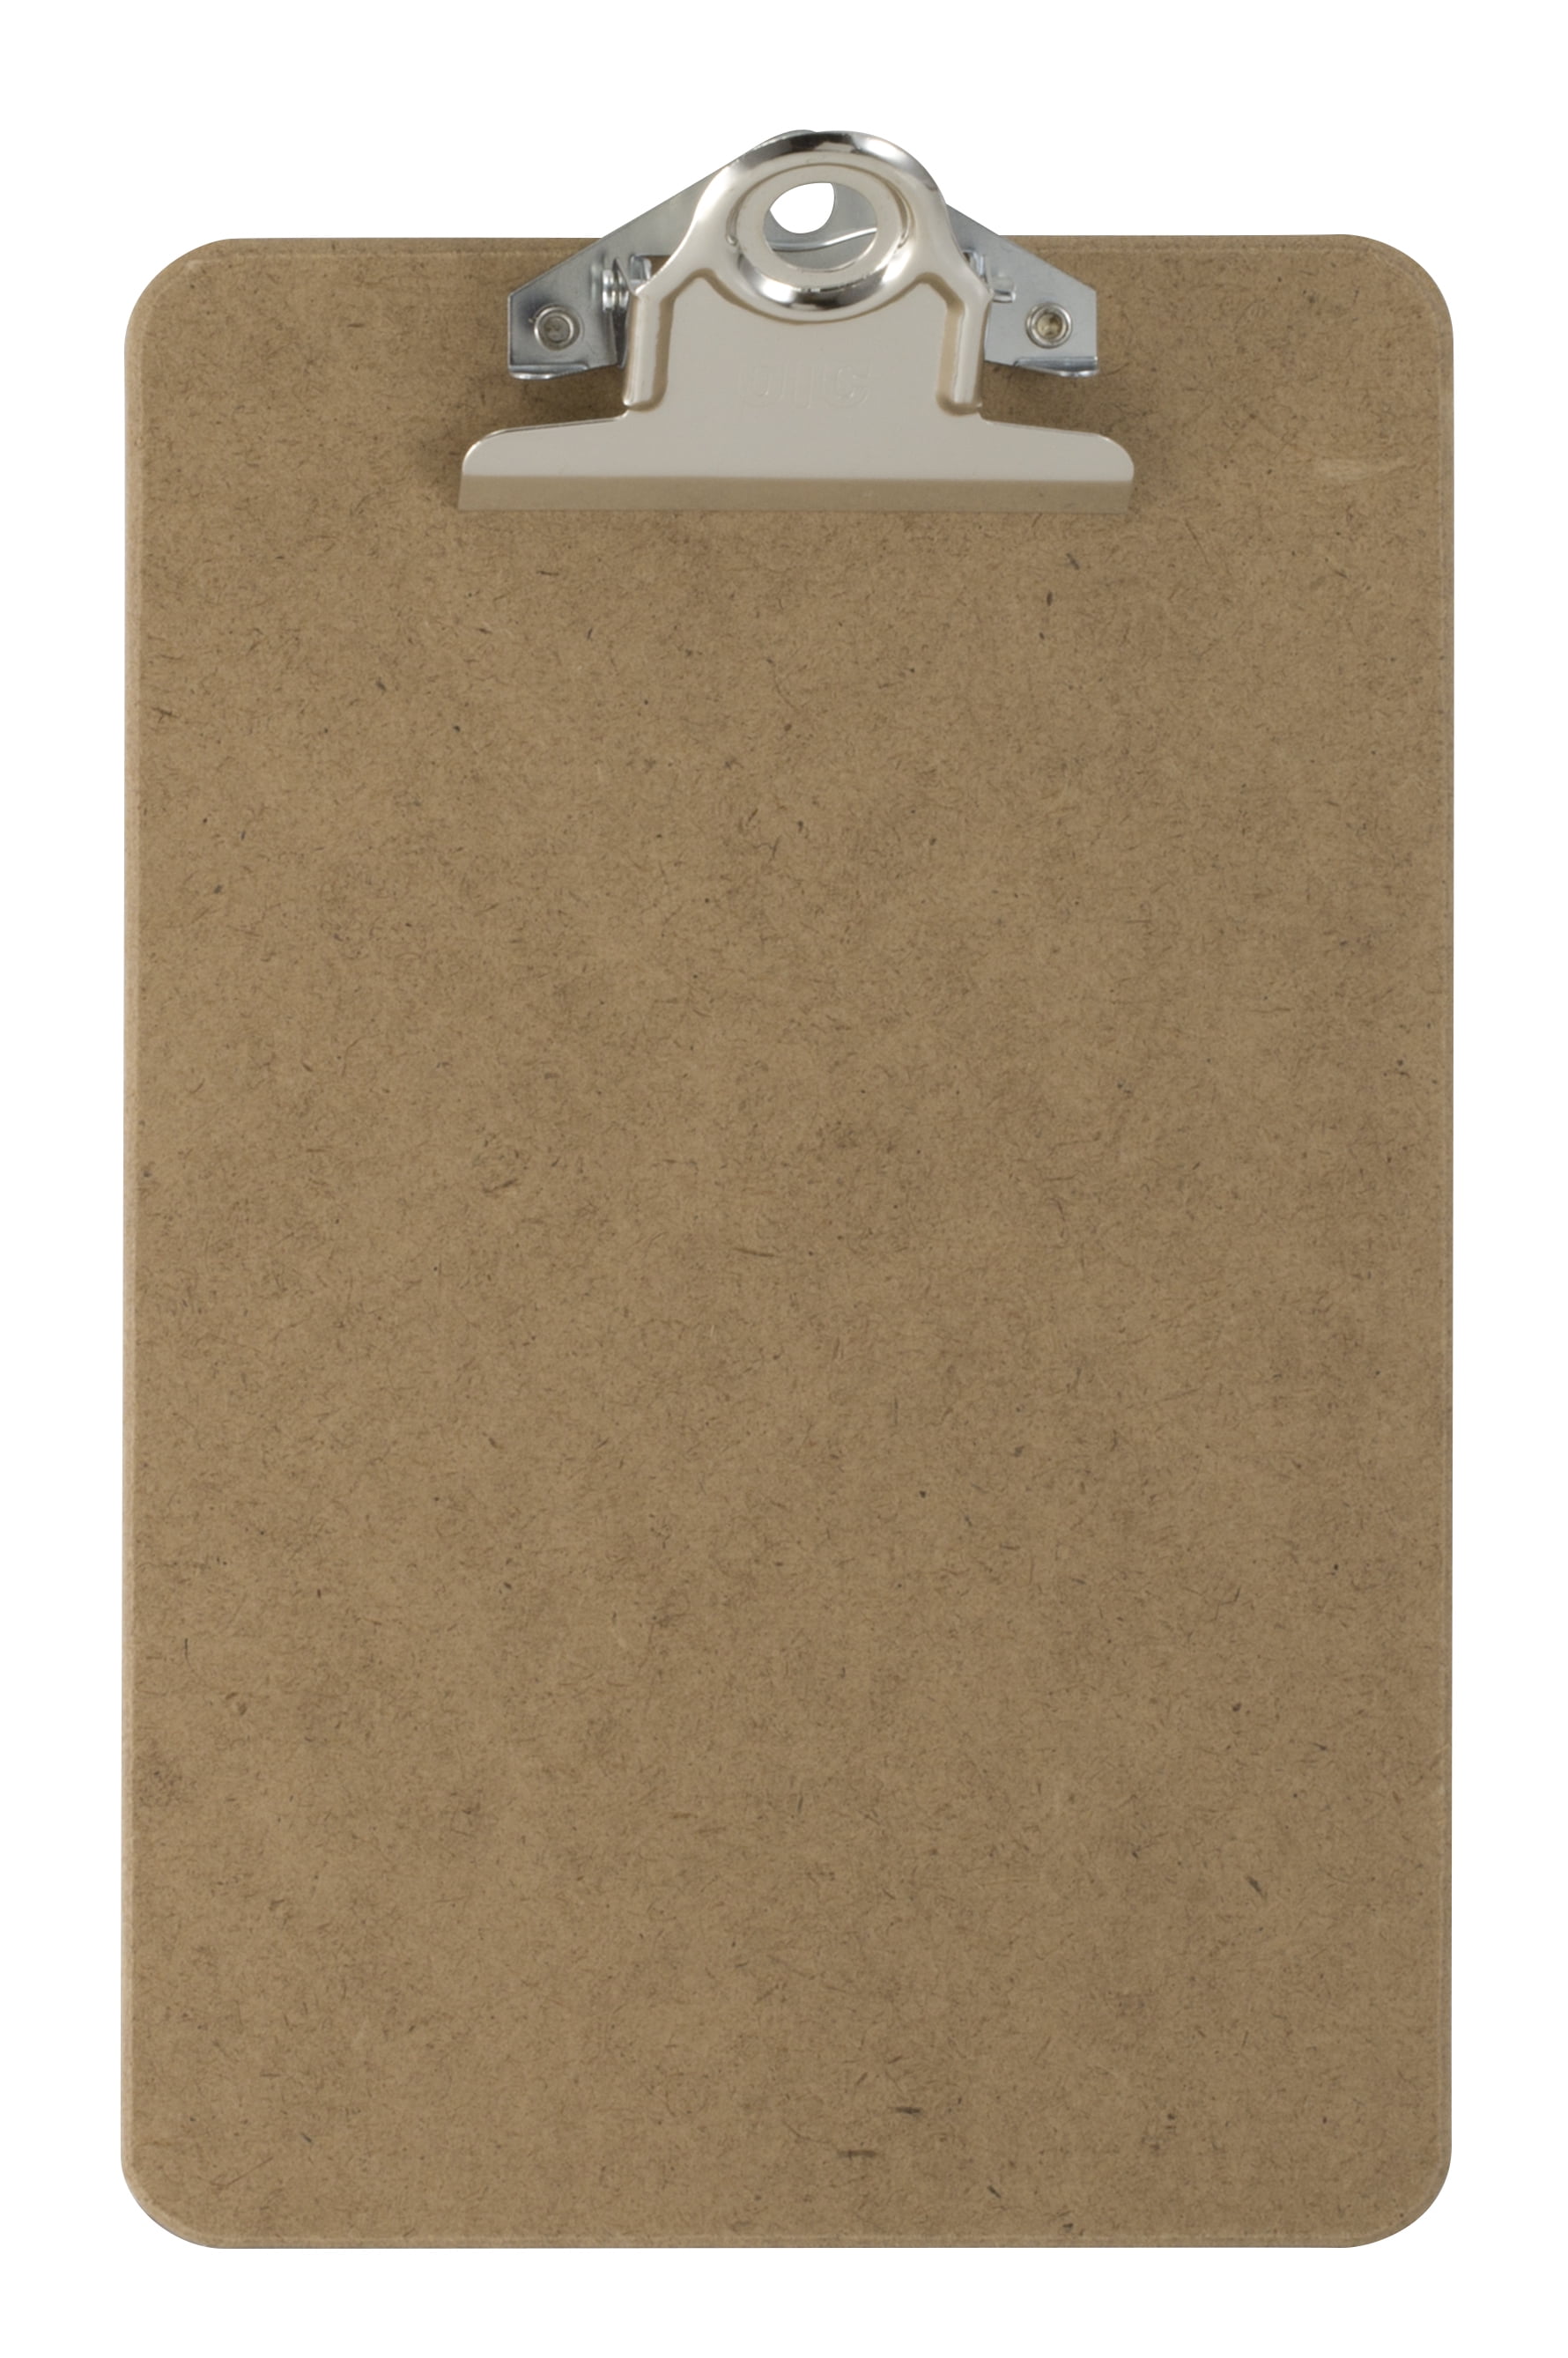 Saunders 05713 Recycled Hardboard Archboard Brown Legal Size Document Holder